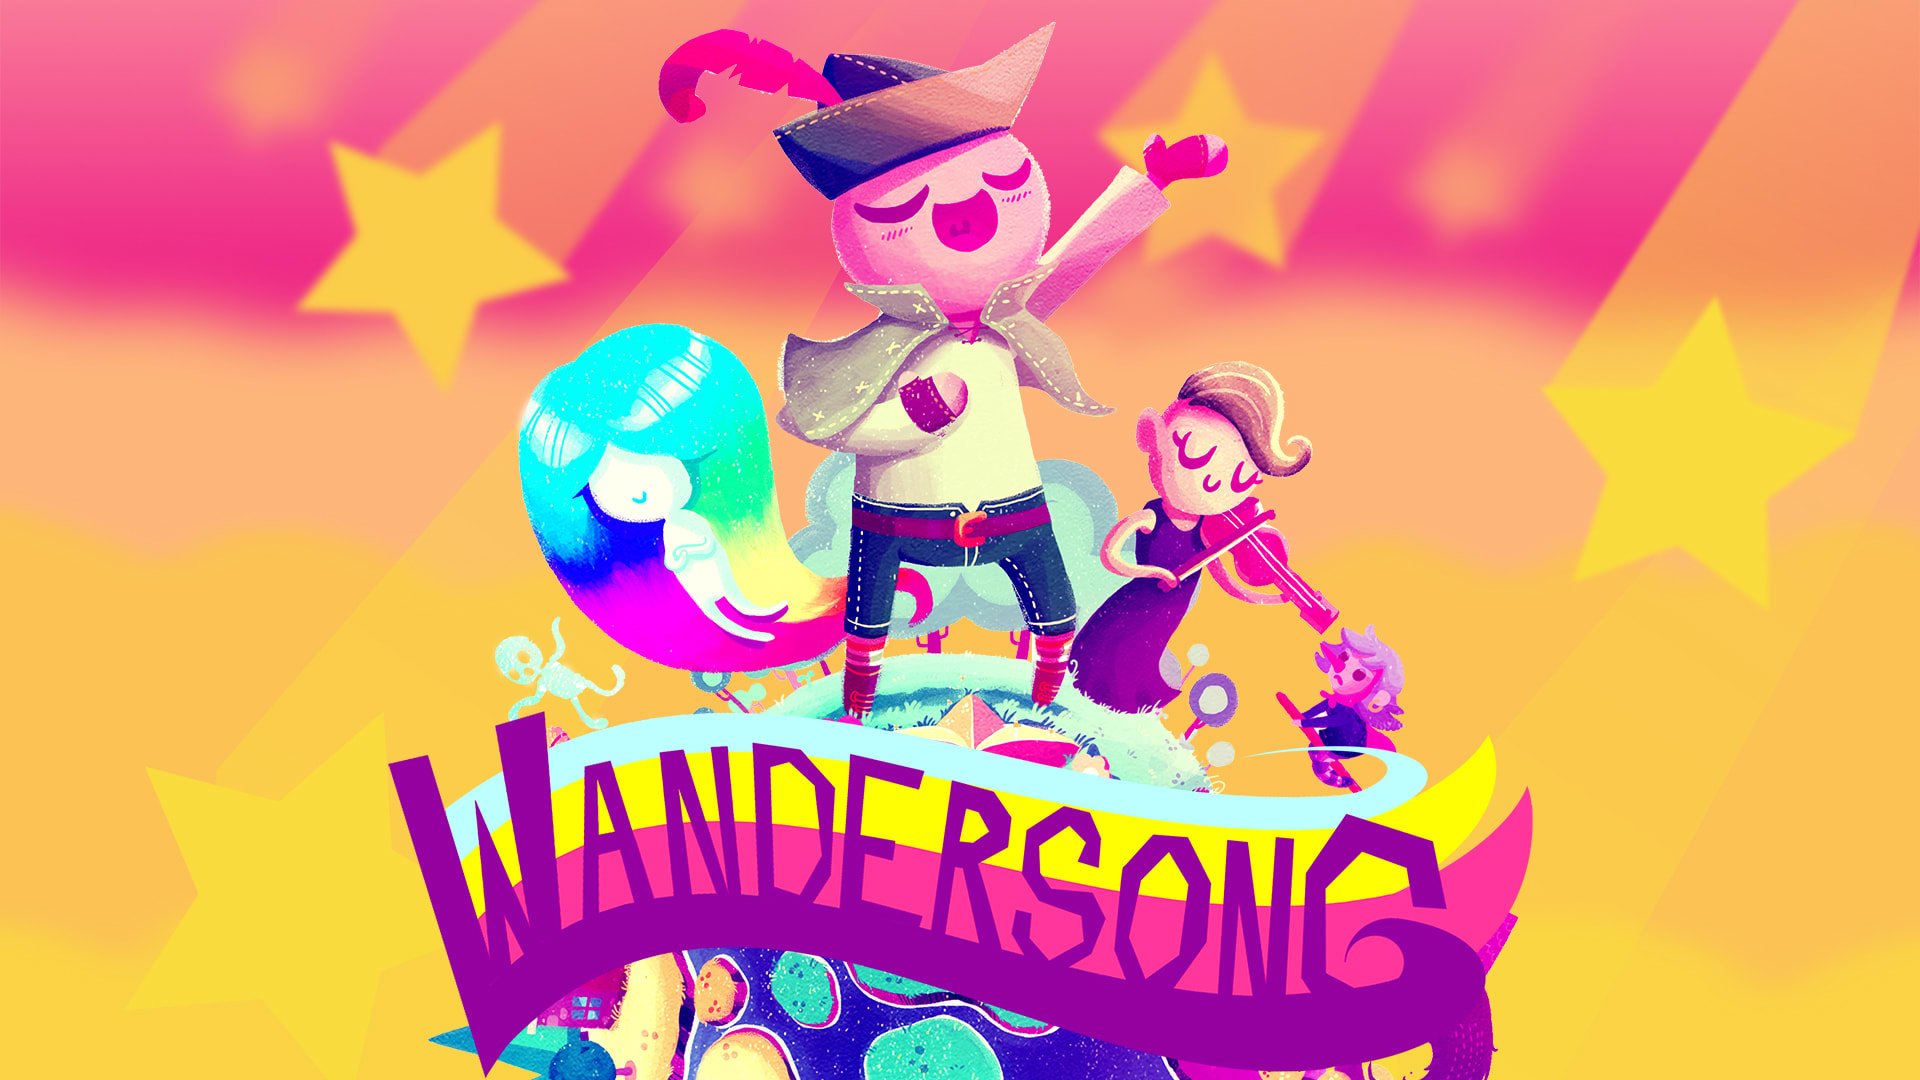 Look at that face! But can you pet them? - Wandersong